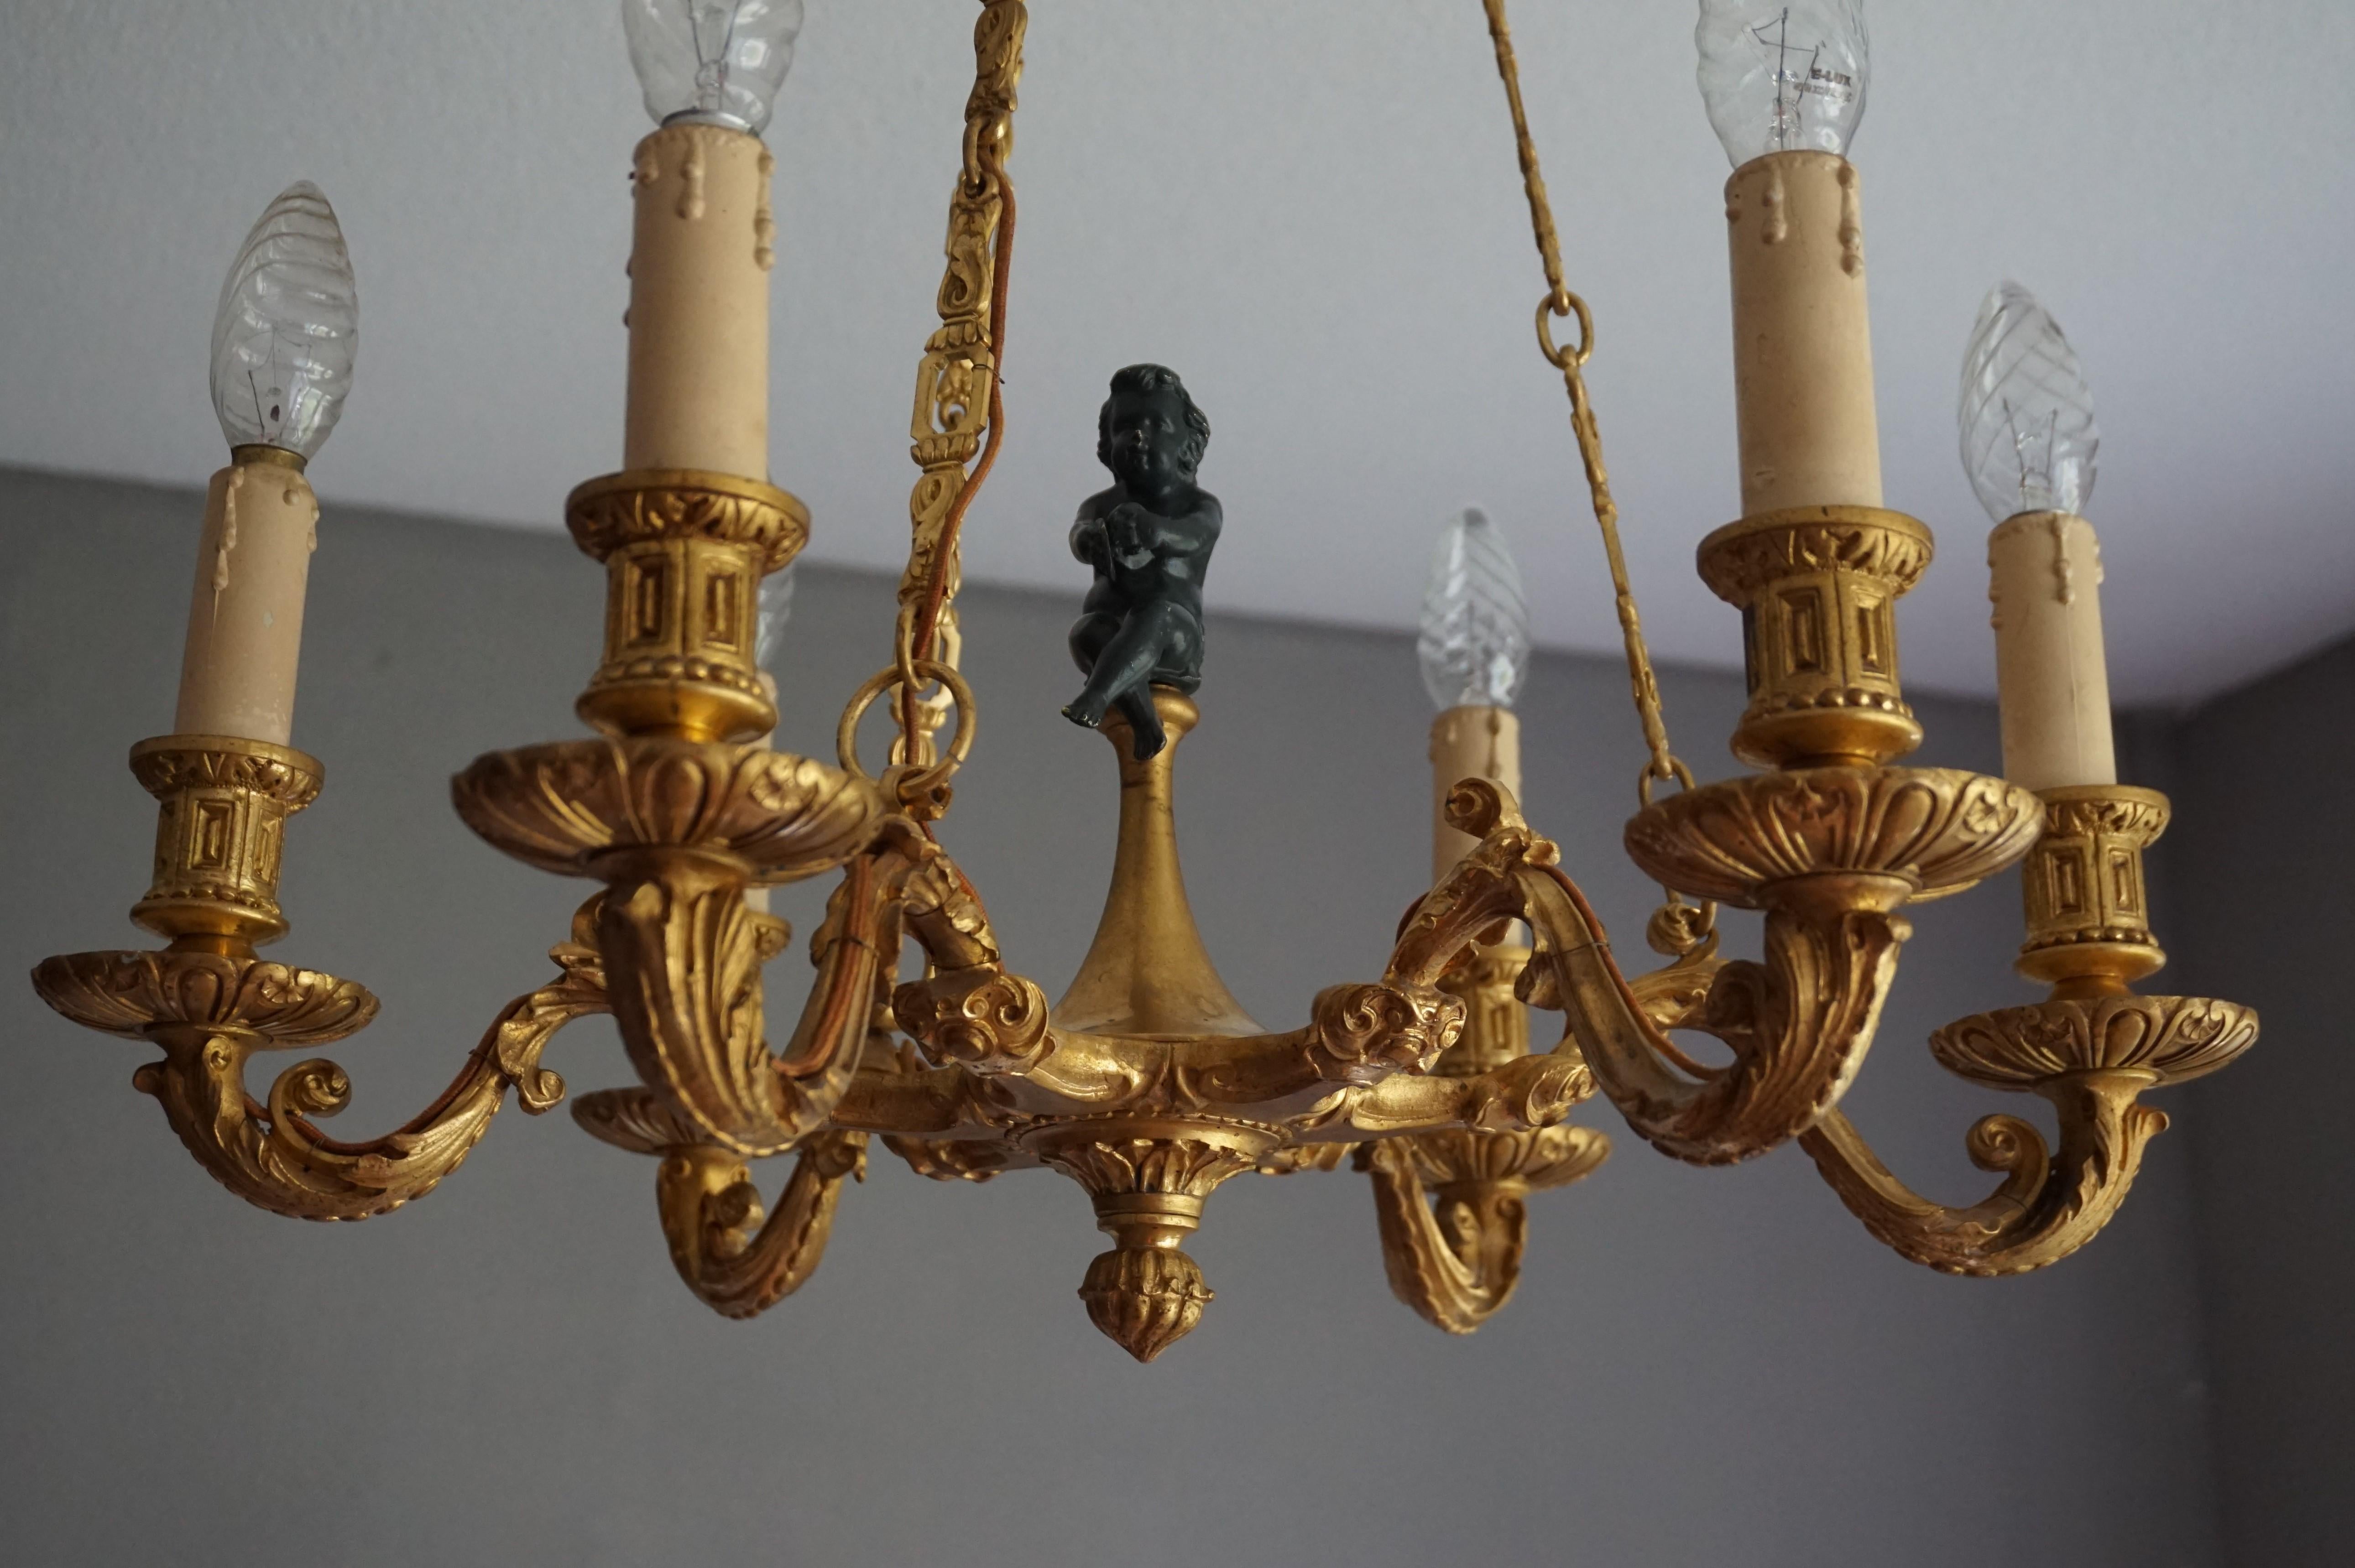 Semi antique and beautifully gilded French chandelier.

This beautifully gilt French chandelier both on and off will literally light up the room she is in. We love everything about this gilt bronze work of lighting art. It is perfectly balanced, it